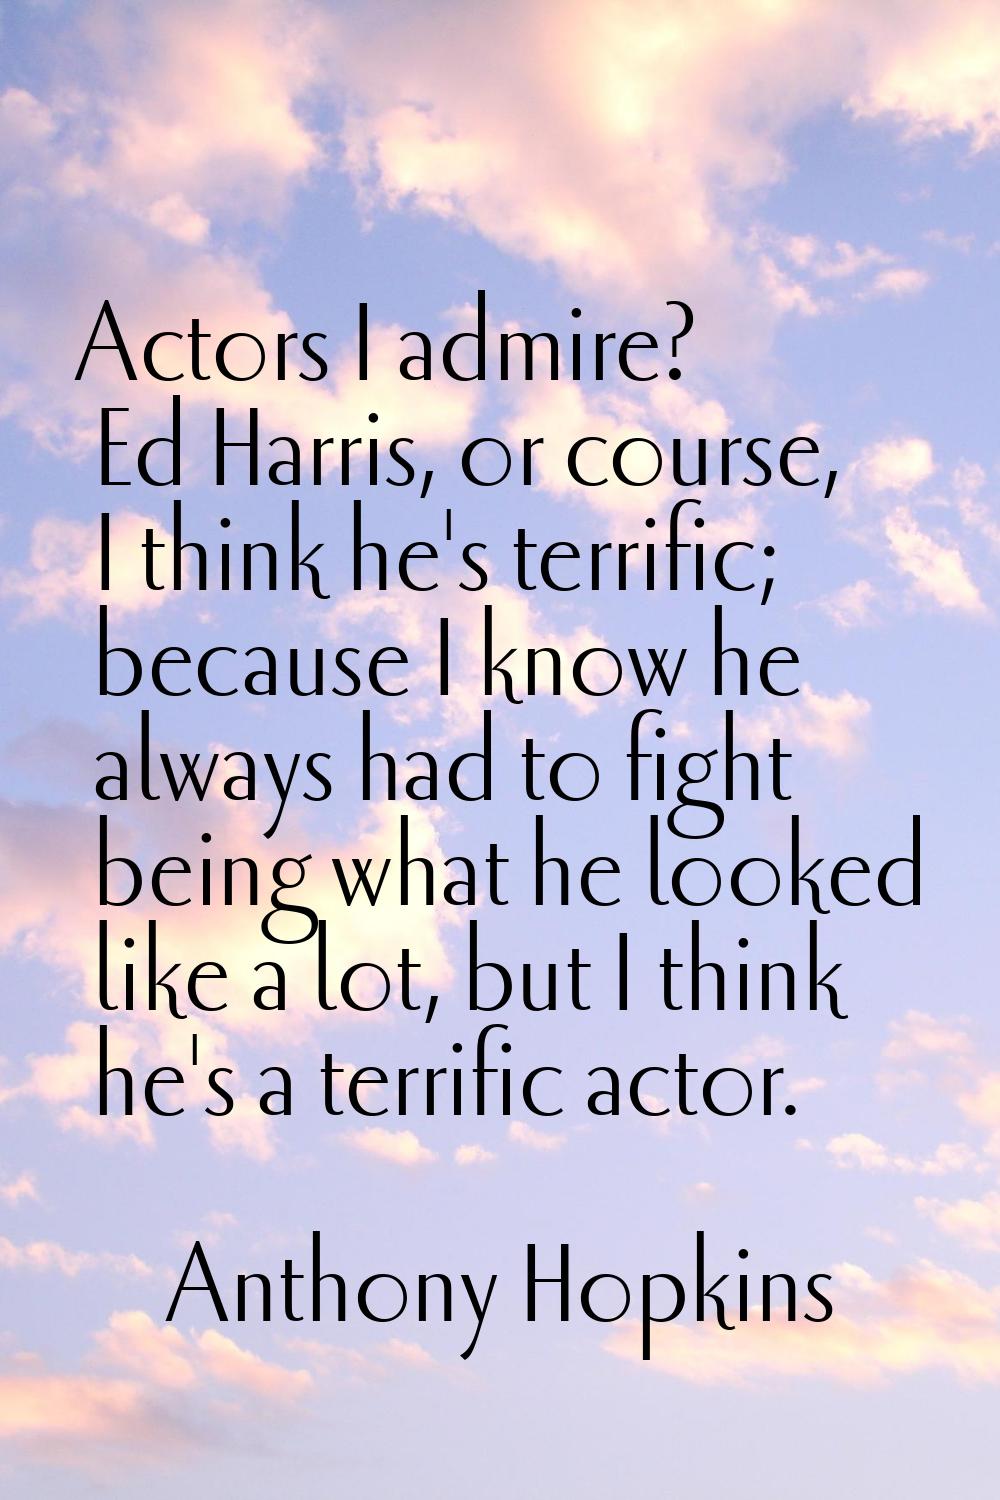 Actors I admire? Ed Harris, or course, I think he's terrific; because I know he always had to fight